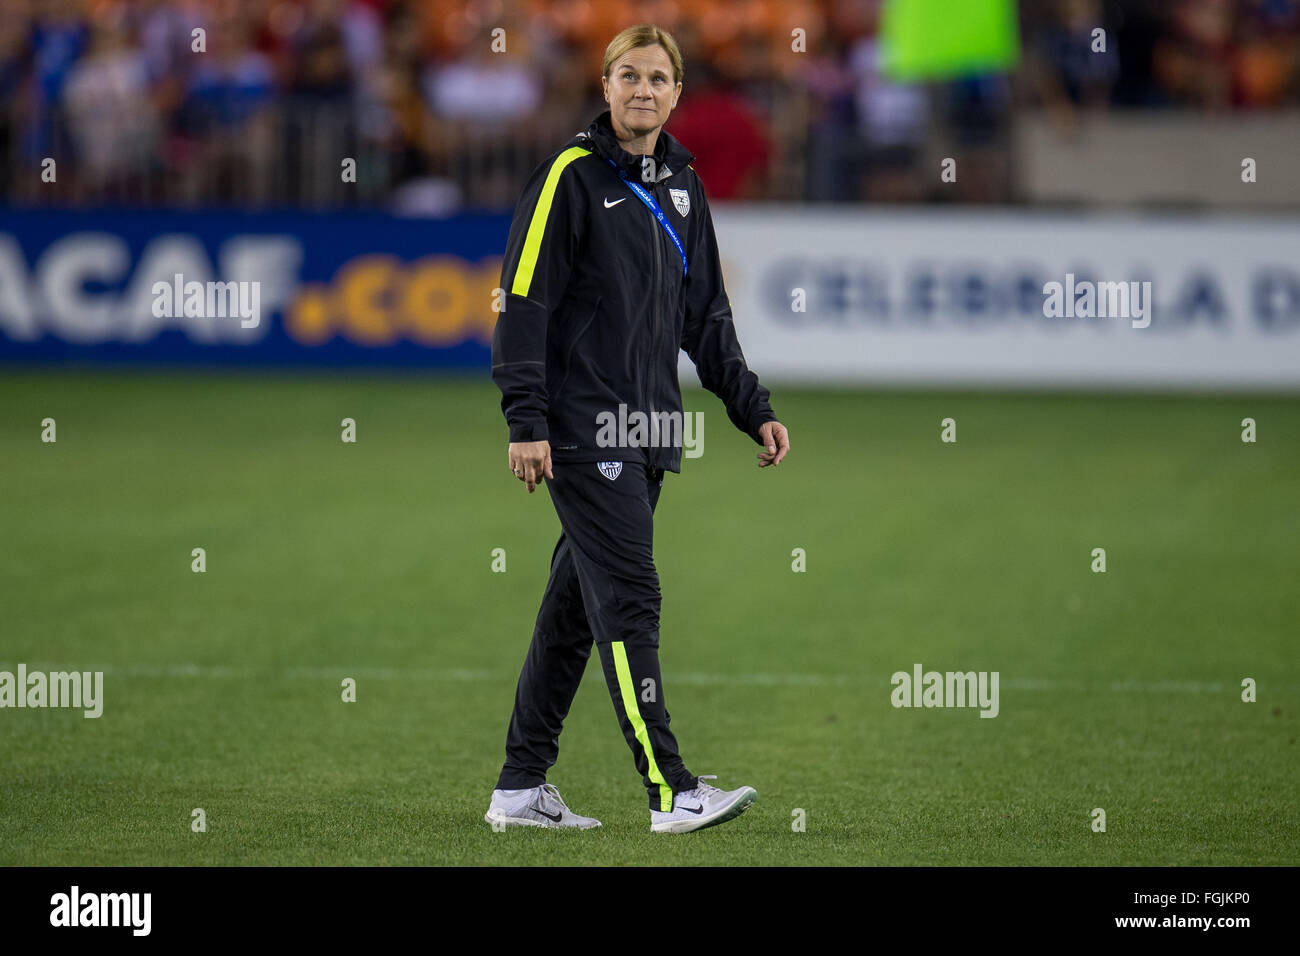 Houston, Texas, USA. 19th February, 2016. February 19, 2016: United States head coach Jillian Ellis walks on the field prior to a semi-final CONCACAF Olympic Qualifying soccer match between the USA and Trinidad & Tobago at BBVA Compass Stadium in Houston, TX. USA won 5-0 and earned a spot in the Summer Olympics.Trask Smith/CSM Credit:  Cal Sport Media/Alamy Live News Stock Photo